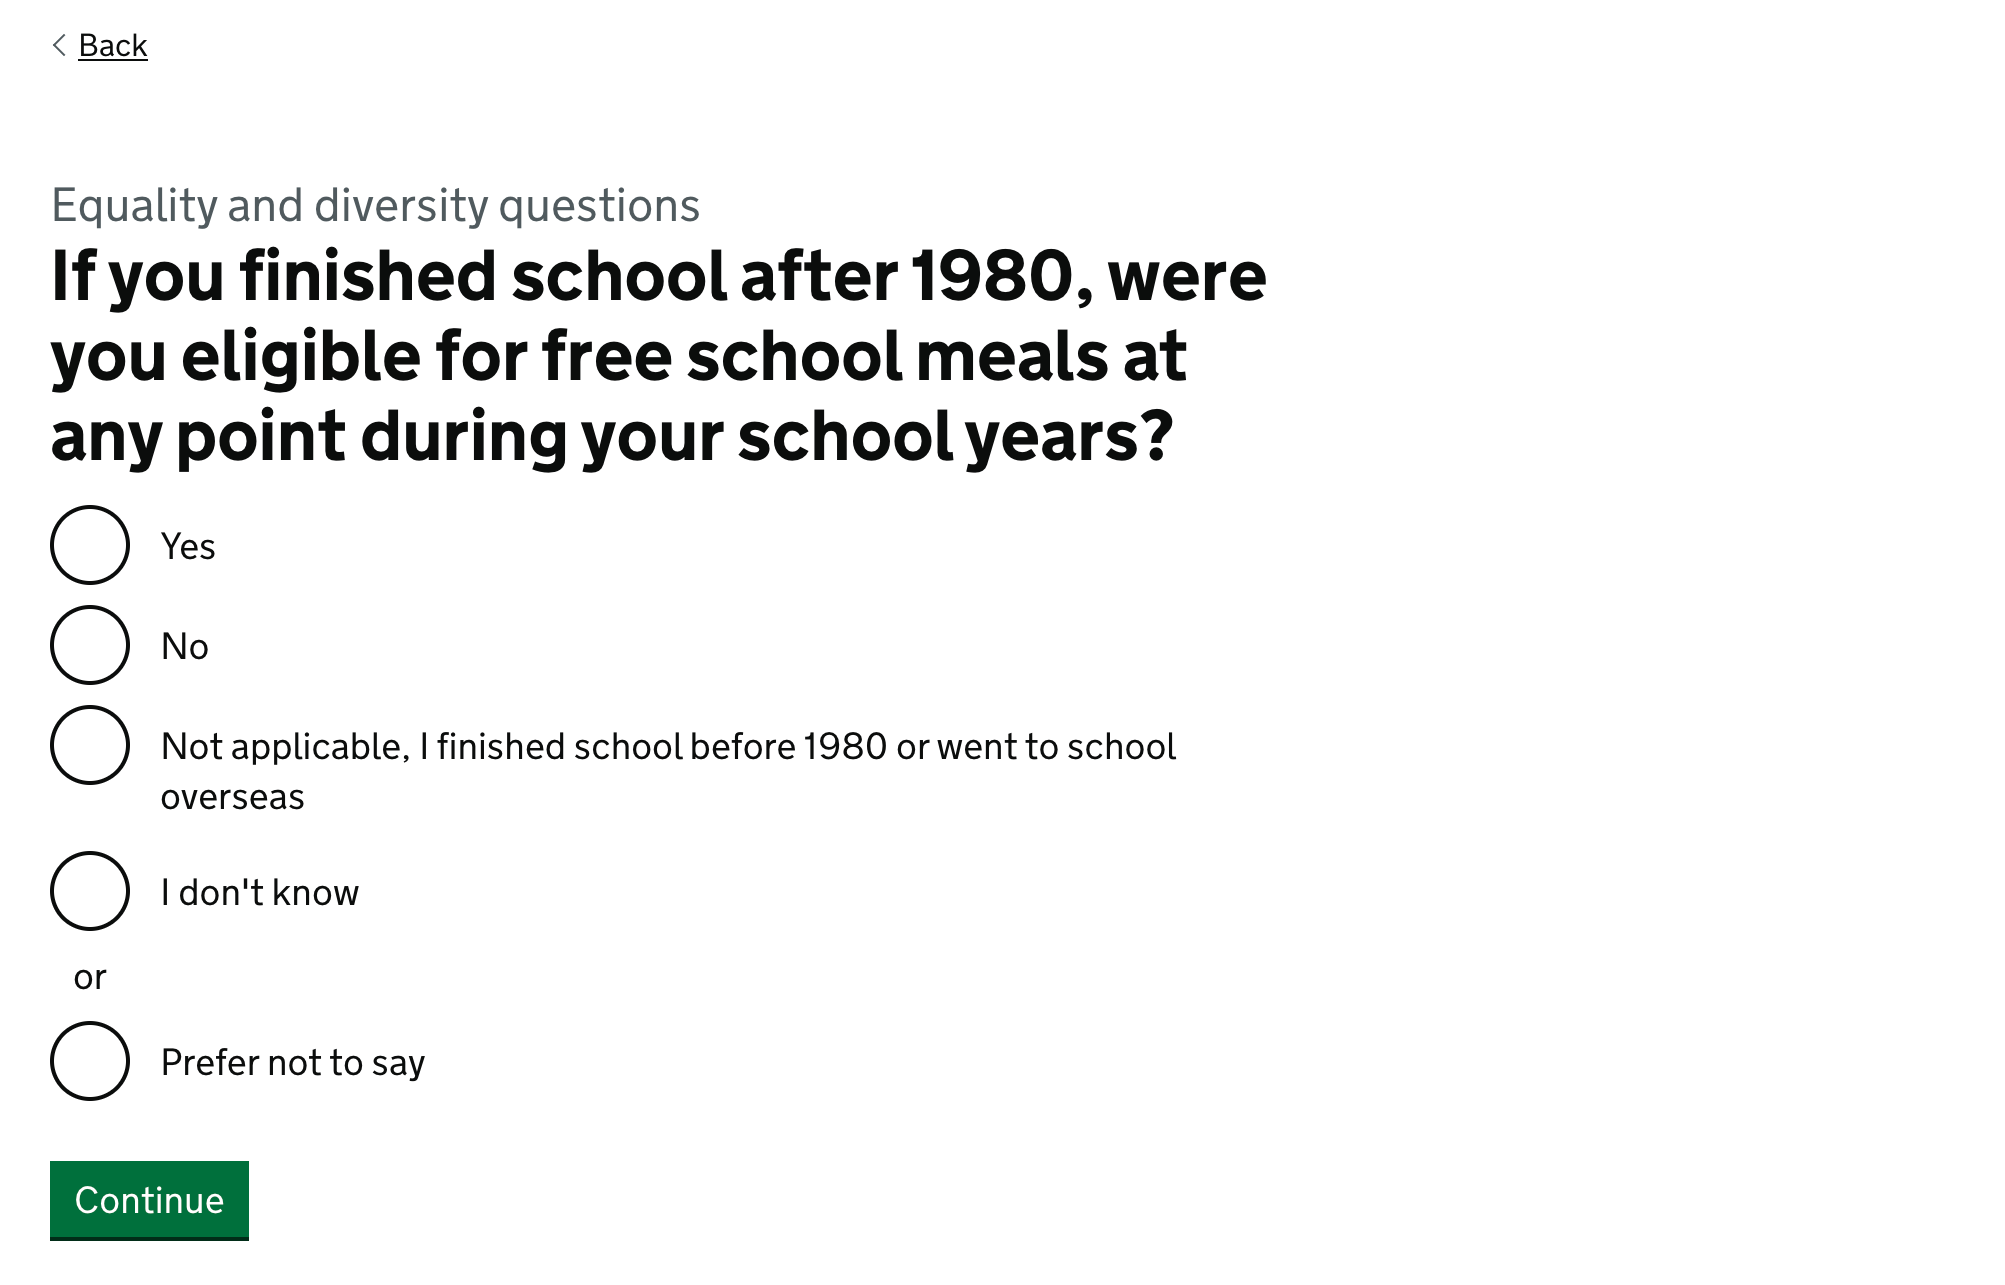 Screenshot showing a page with the title "If you finished school after 1980, were you eligible for free school meals at any point during your school years?" and the options Yes, No, "Not applicable, I finished school before 1980 or went to school overseas", "I do not know" and "Prefer not to say".